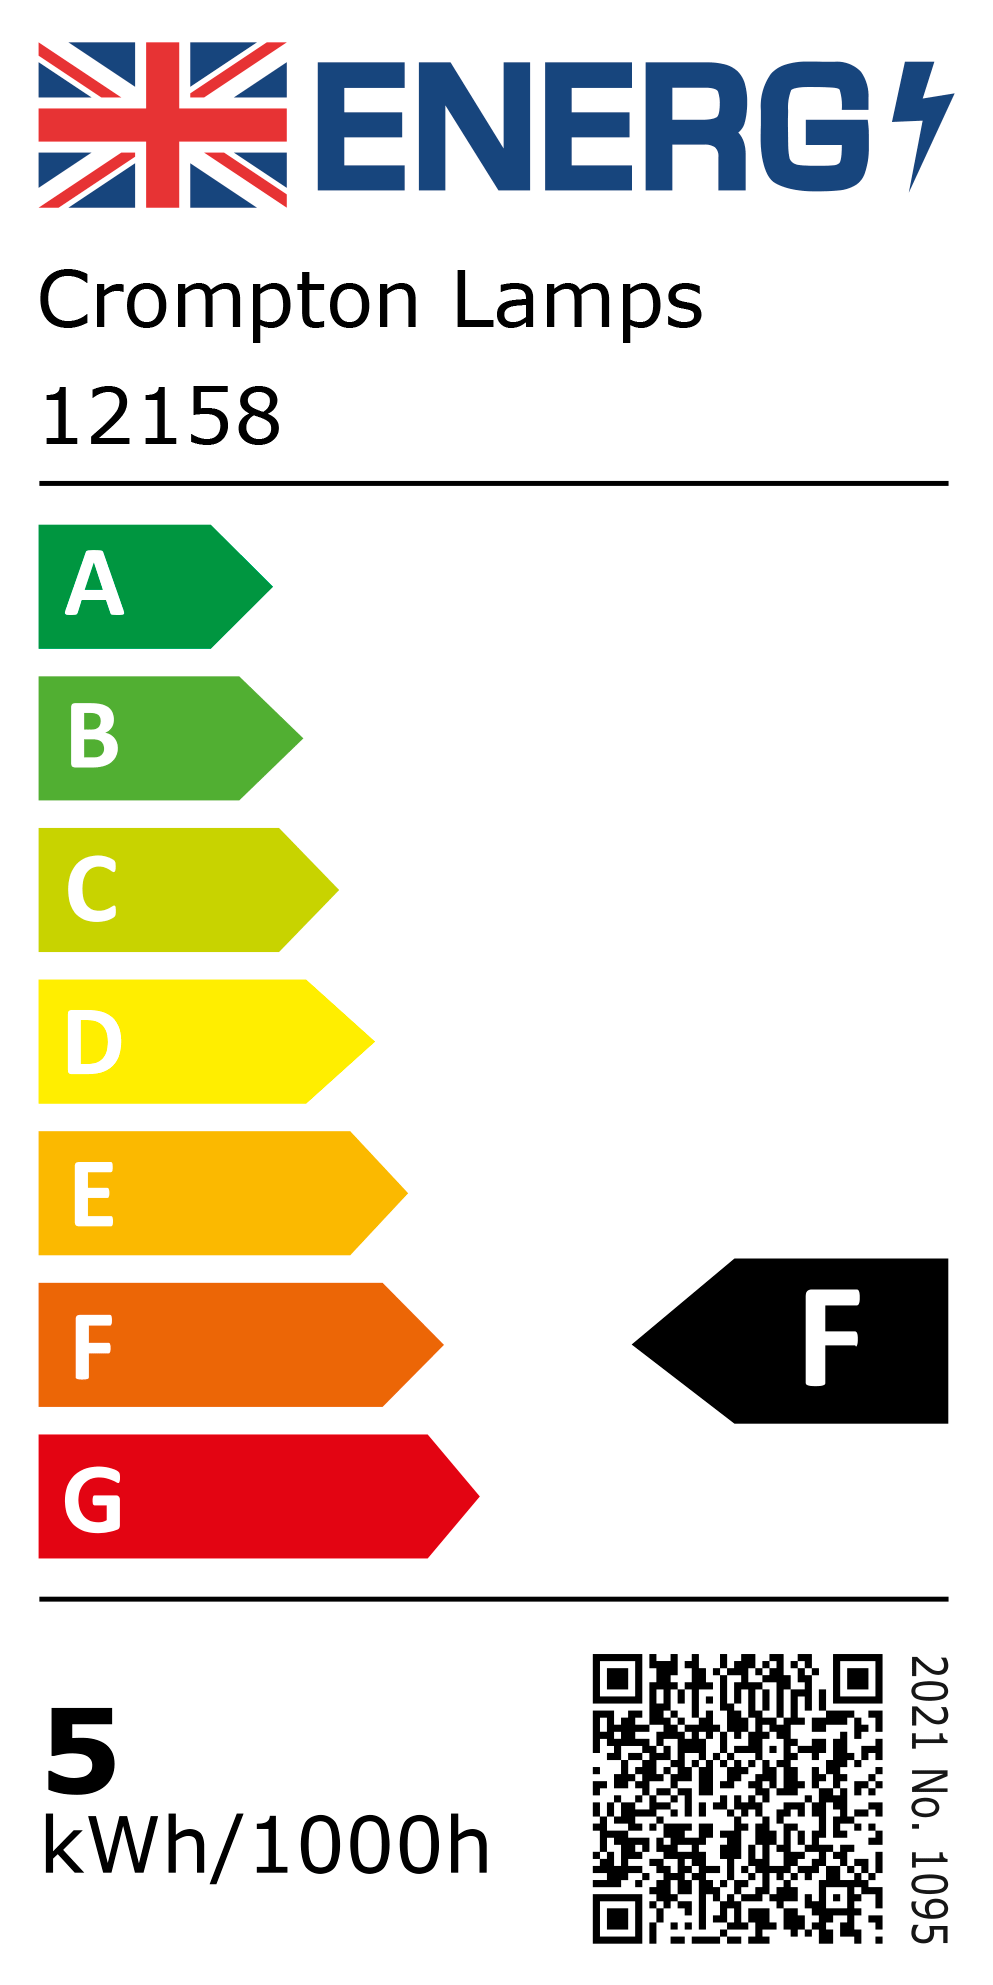 New 2021 Energy Rating Label: Stock Code 12158